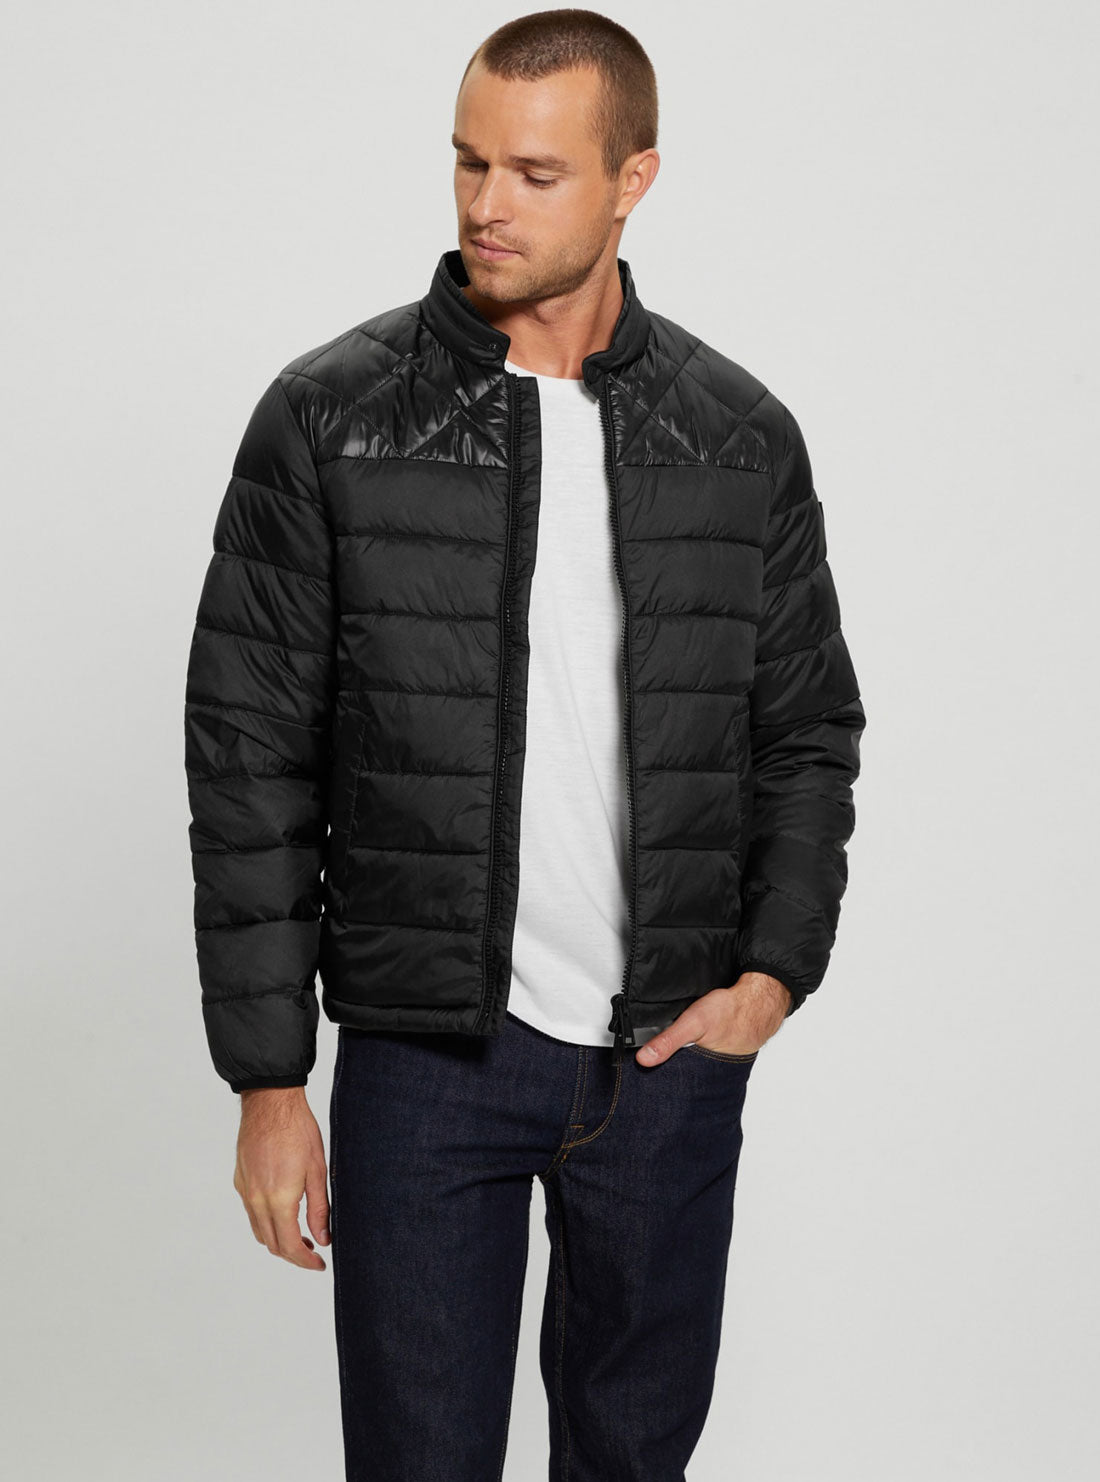 Eco Black Lightweight Puffer Jacket | GUESS Men's Apparel | front view